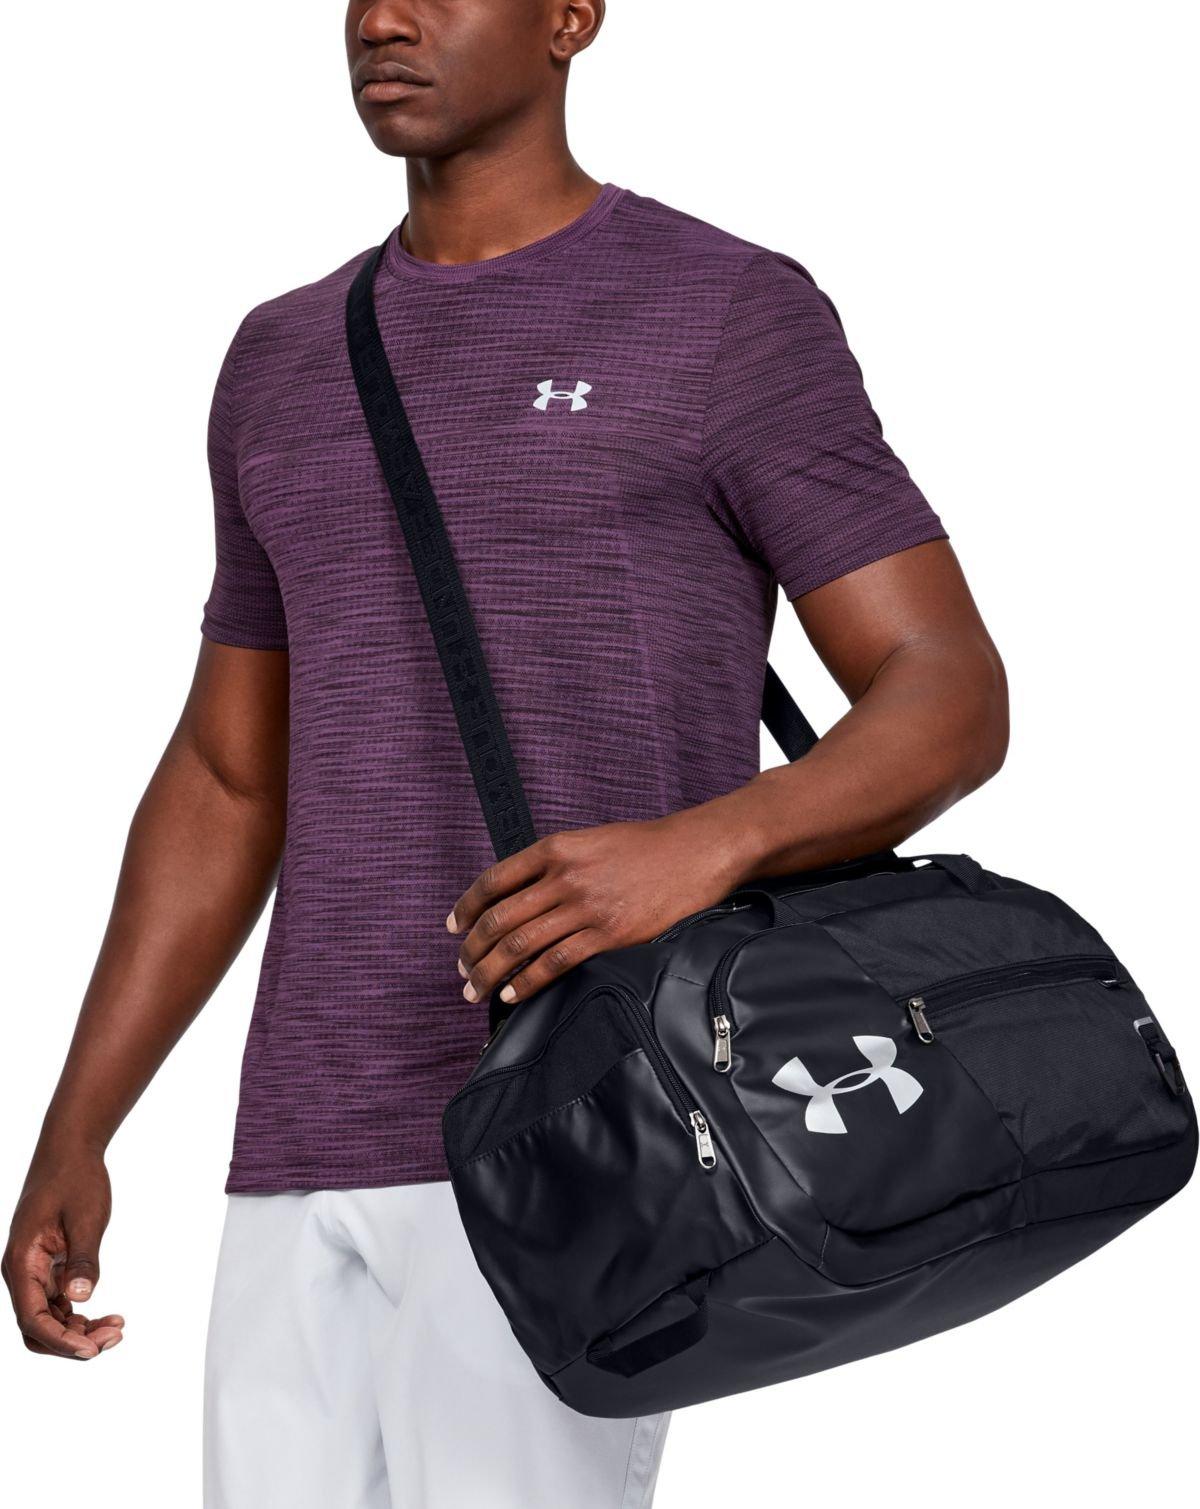 under armour duffle bag small